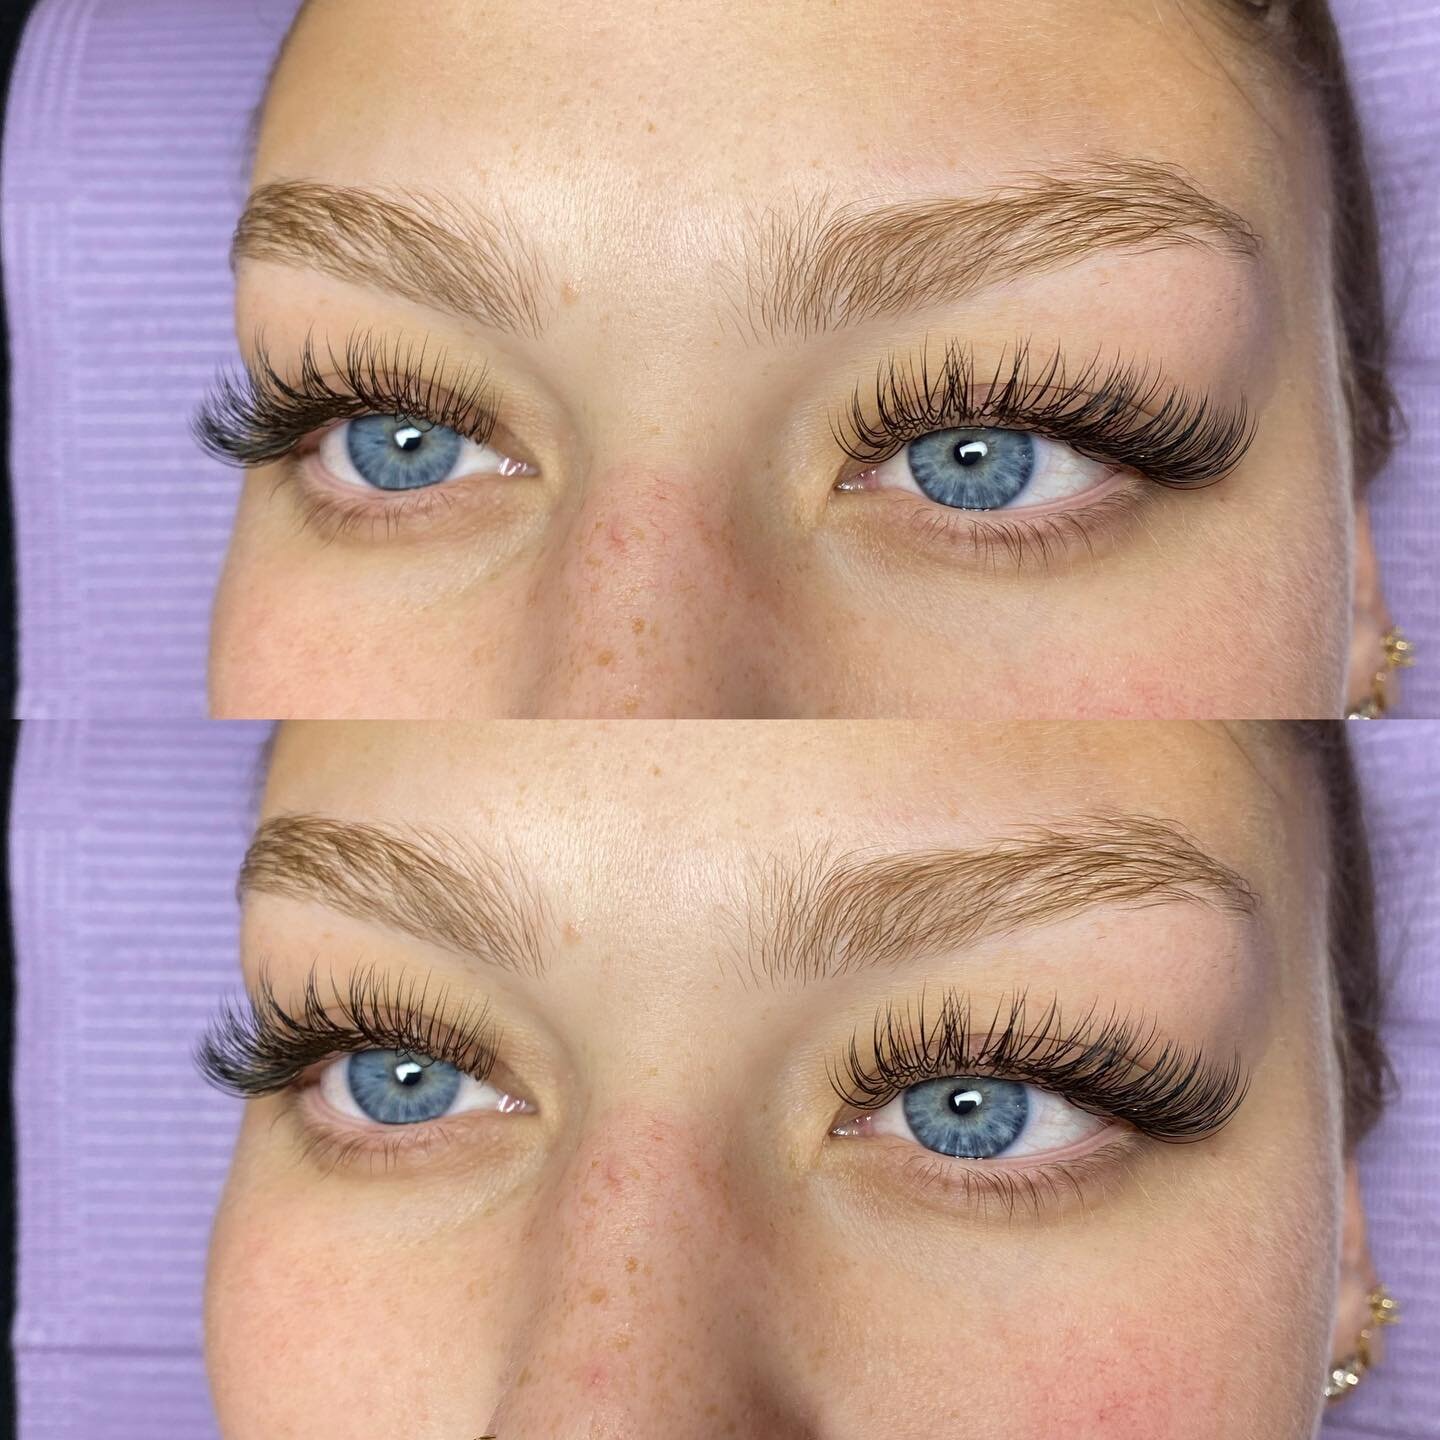 𝐒𝐔𝐌𝐌𝐄𝐑 𝐒𝐀𝐋𝐄 things ✨ Book now for our special &amp; receive $50 Off any Hybrid Set and $30 off any classic set! Book &ldquo;summer lash special&rdquo; when booking, to receive this discount! ⁣This set was created using our very own lash bra